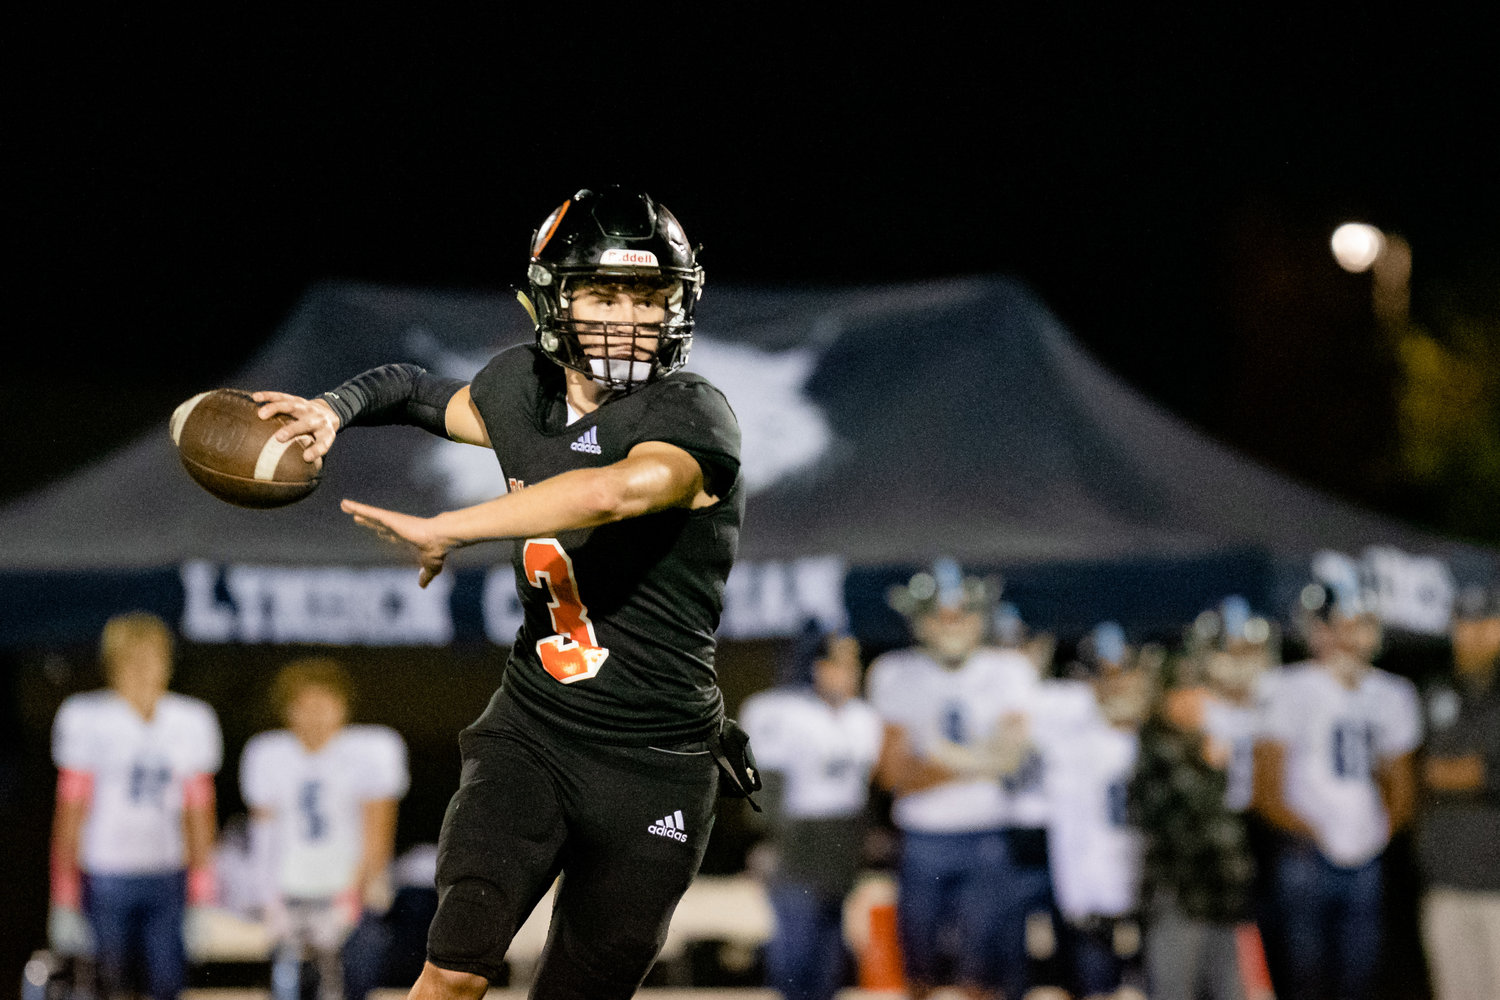 Sophomore quarterback Colin Davis helped put Blaine on the board, connecting twice with his receivers for touchdown passes in the second half.